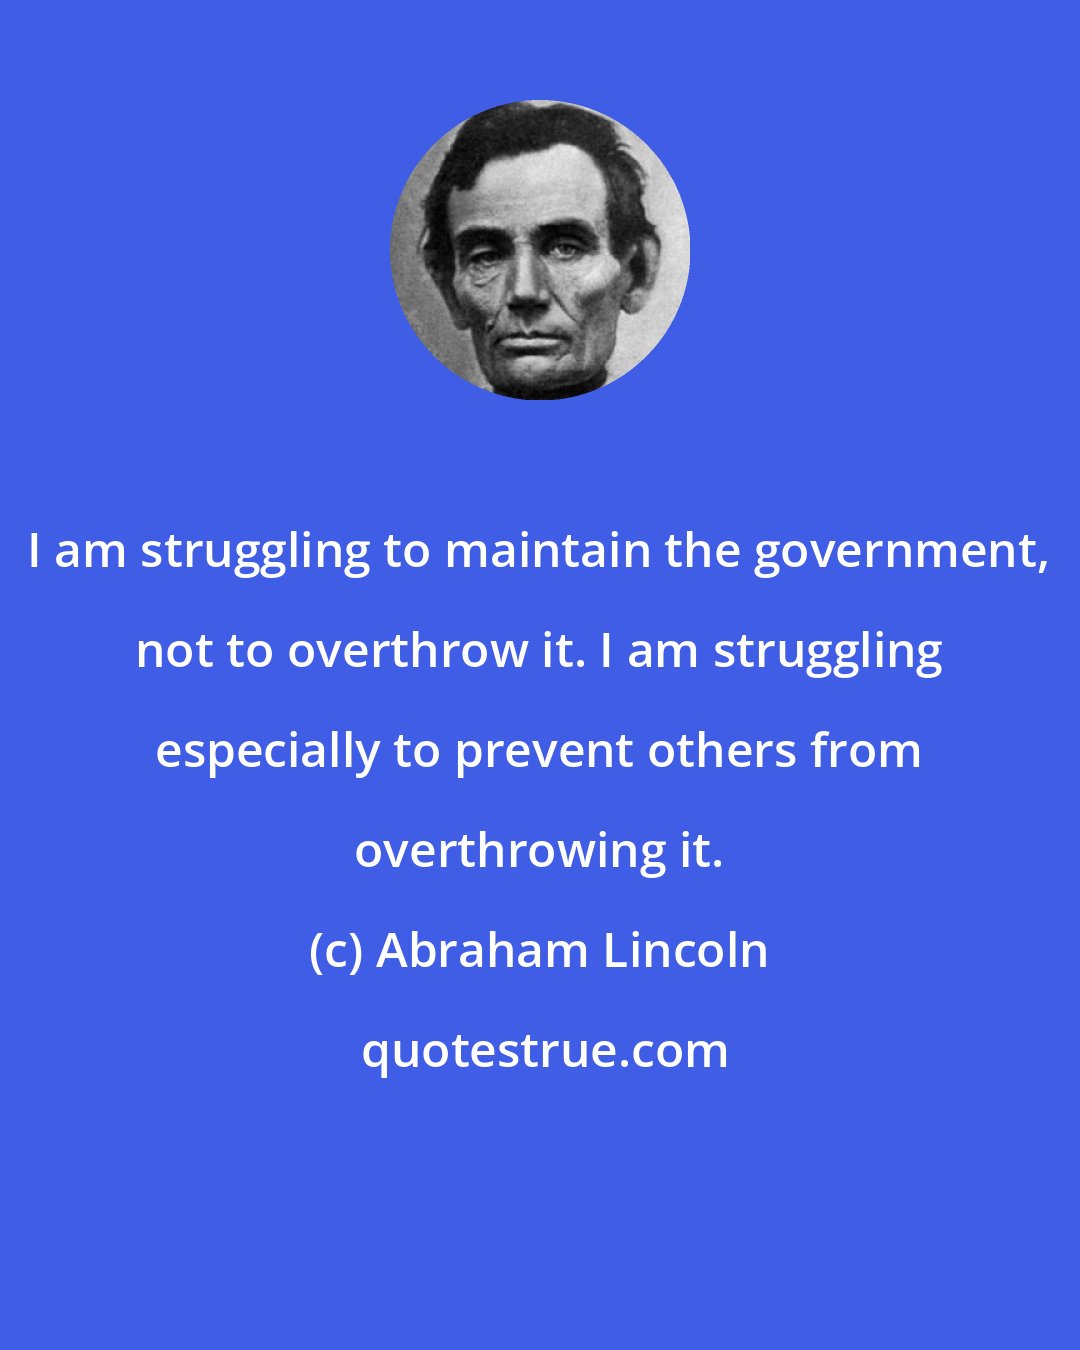 Abraham Lincoln: I am struggling to maintain the government, not to overthrow it. I am struggling especially to prevent others from overthrowing it.